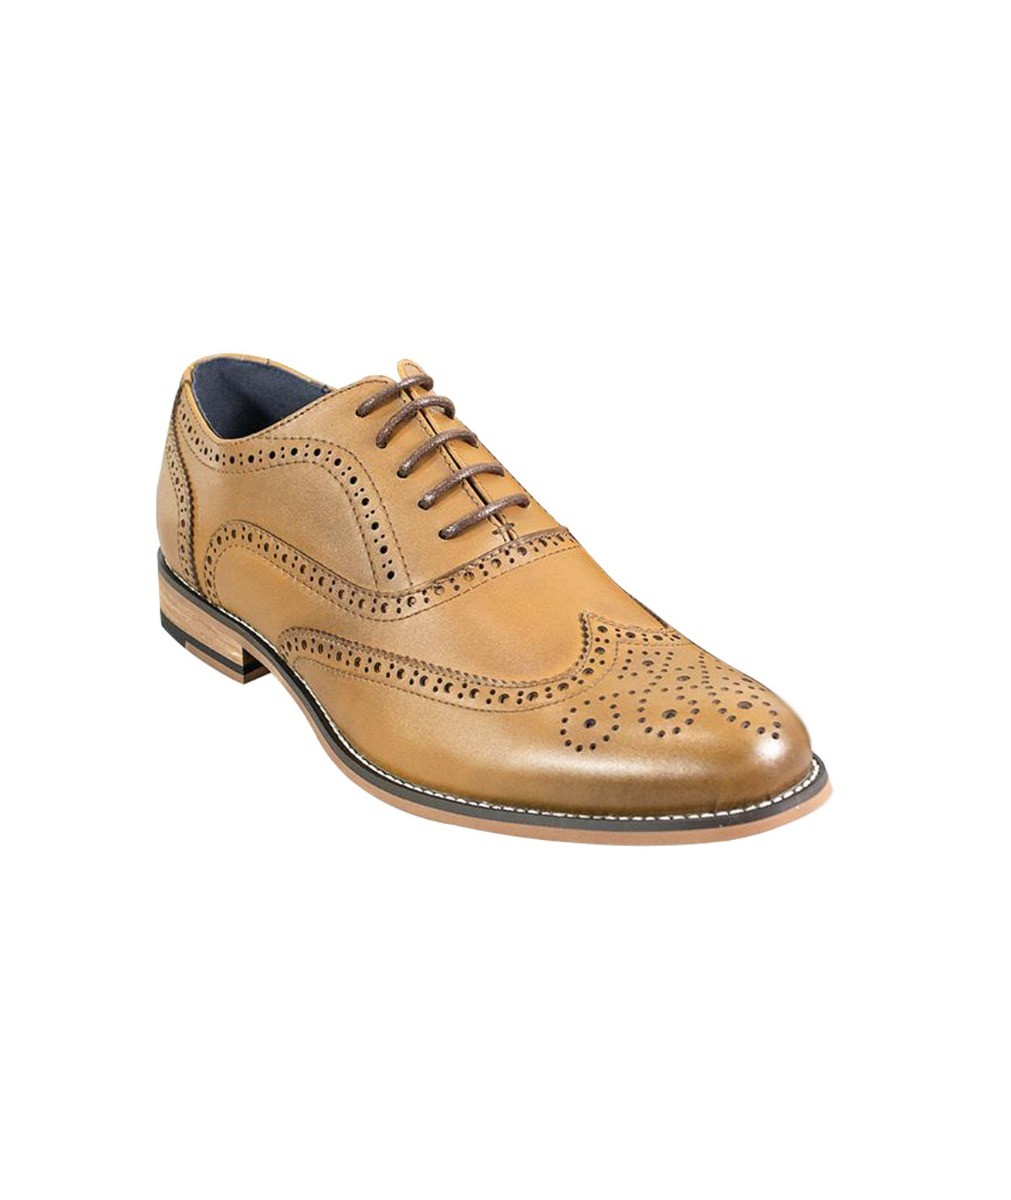 Men's Lace Up Leather Brogue XL Big Size Shoes - Oxford  - Tan Brown